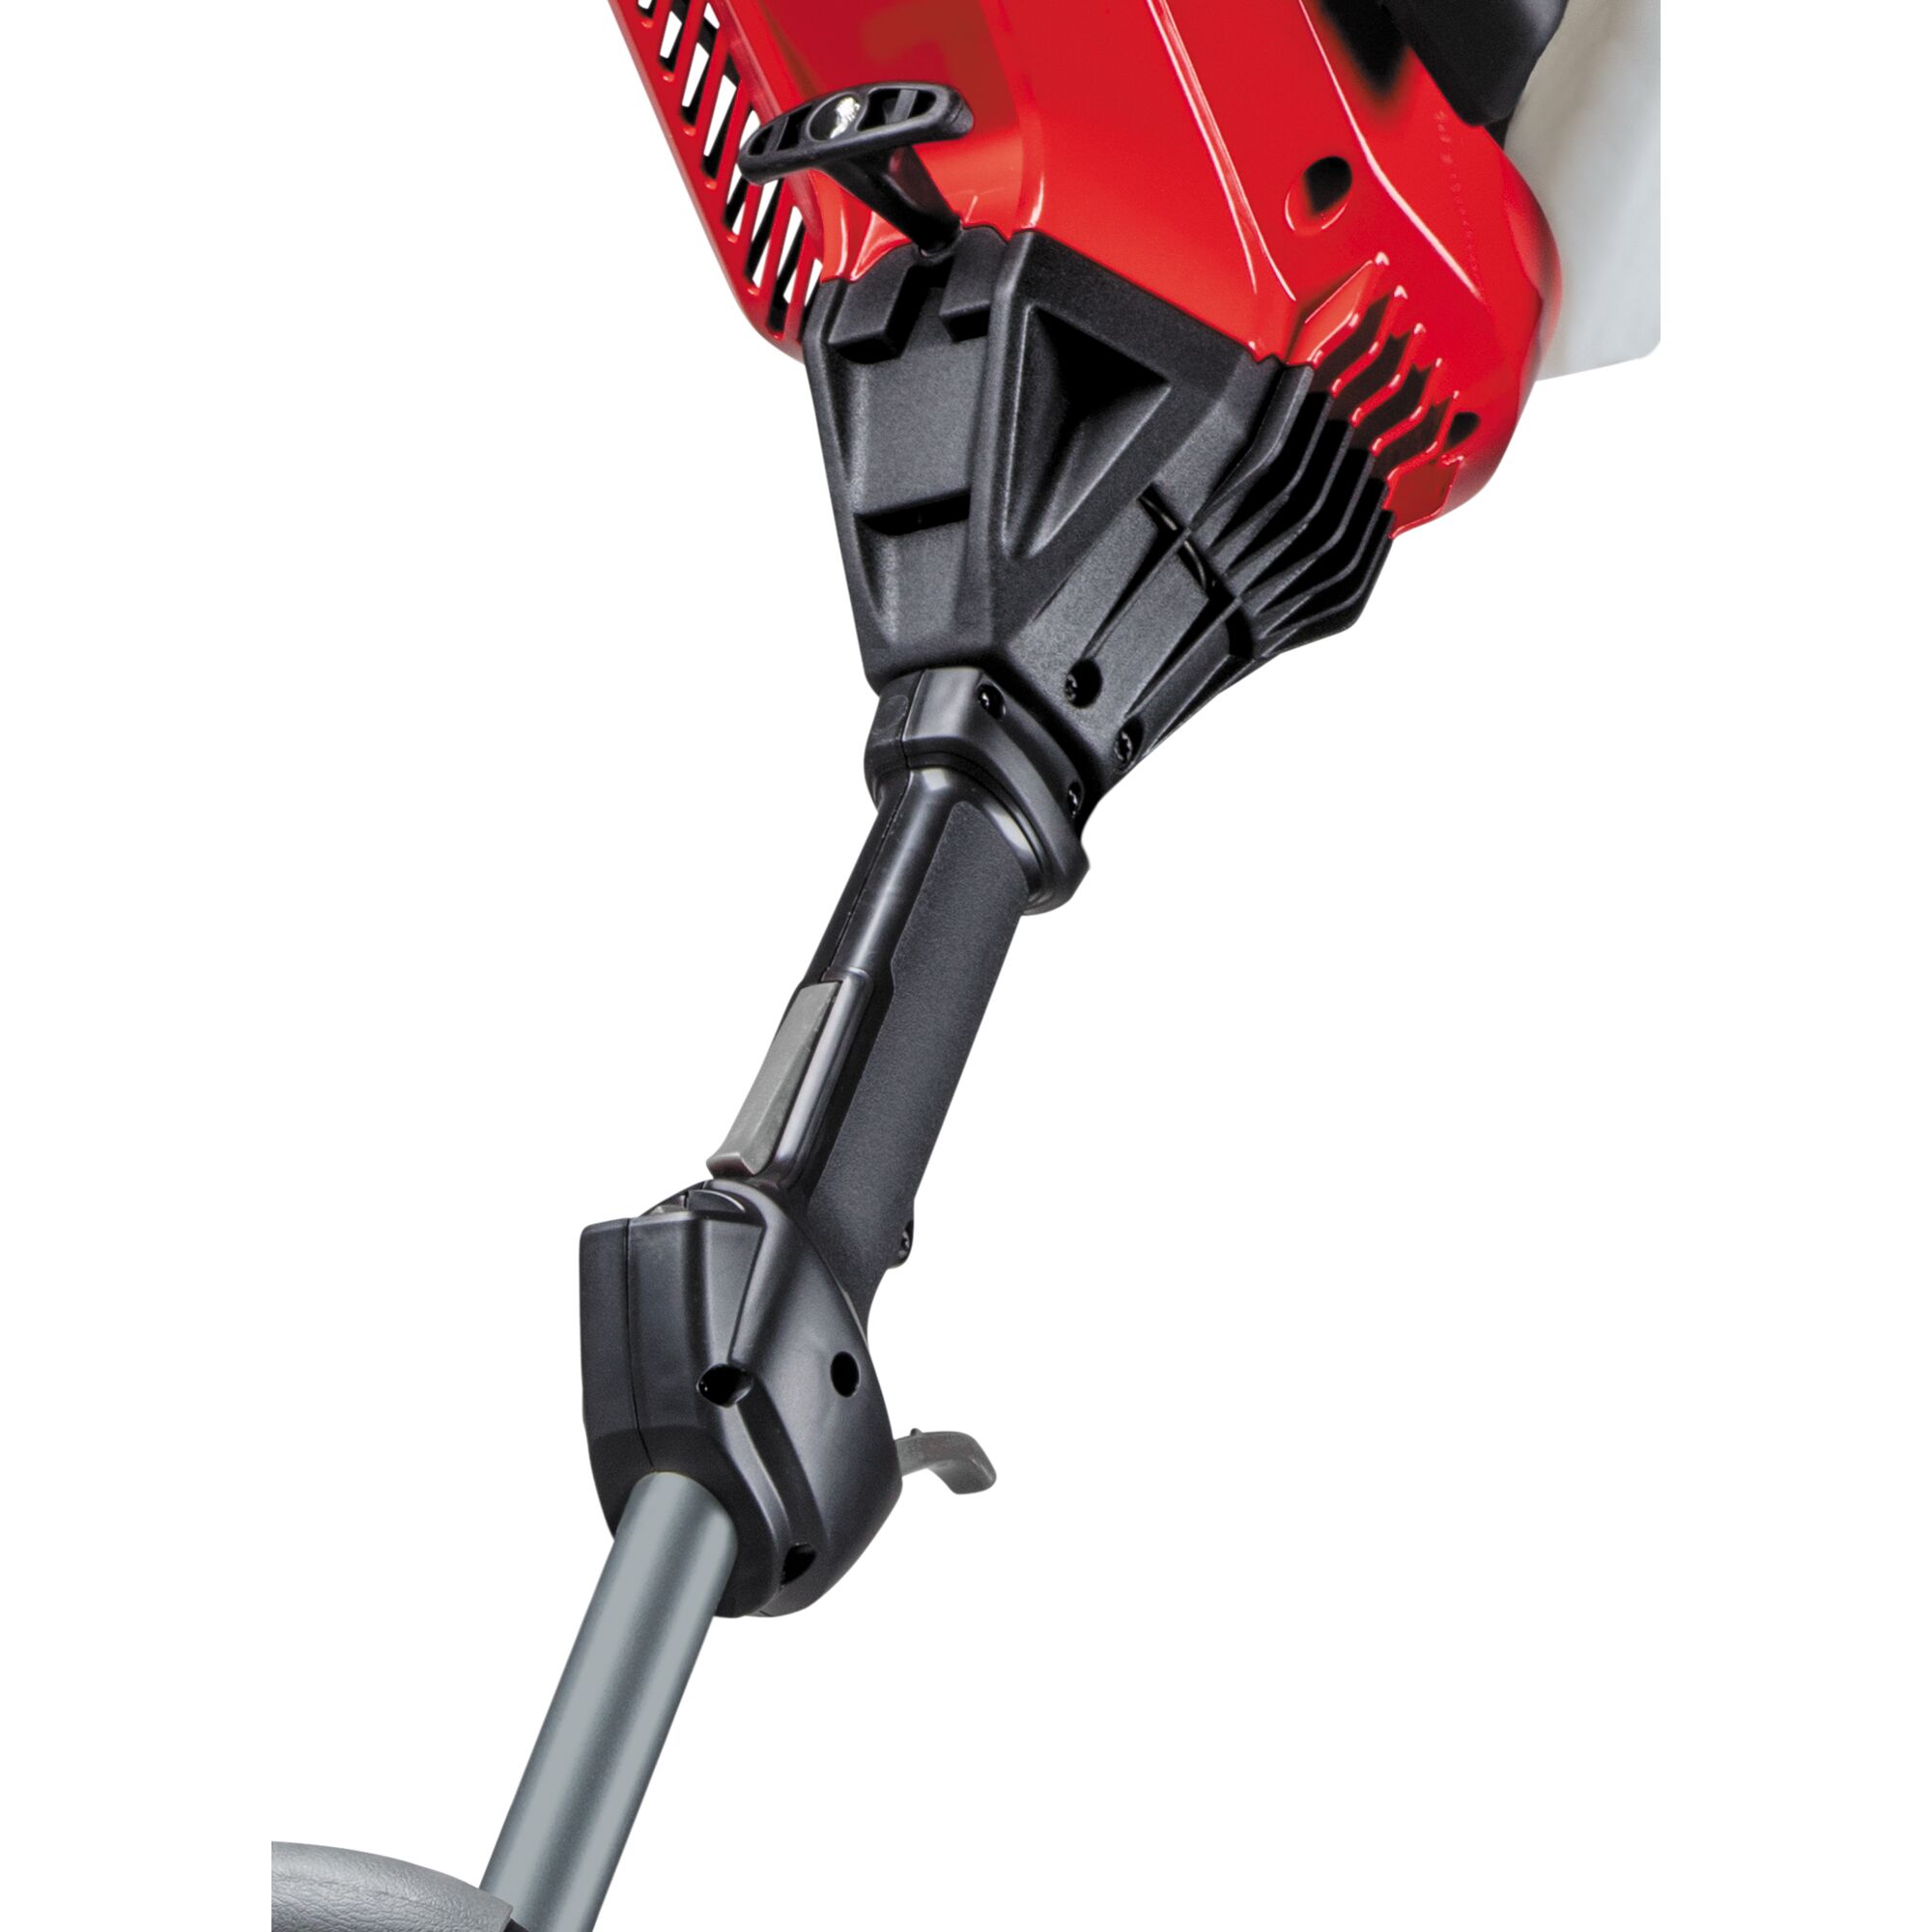 Soft grip ergonomic handle feature of feature of Weedwacker 30 C C 4 cycle 17 inch attachment capable straight shaft gas trimmer.